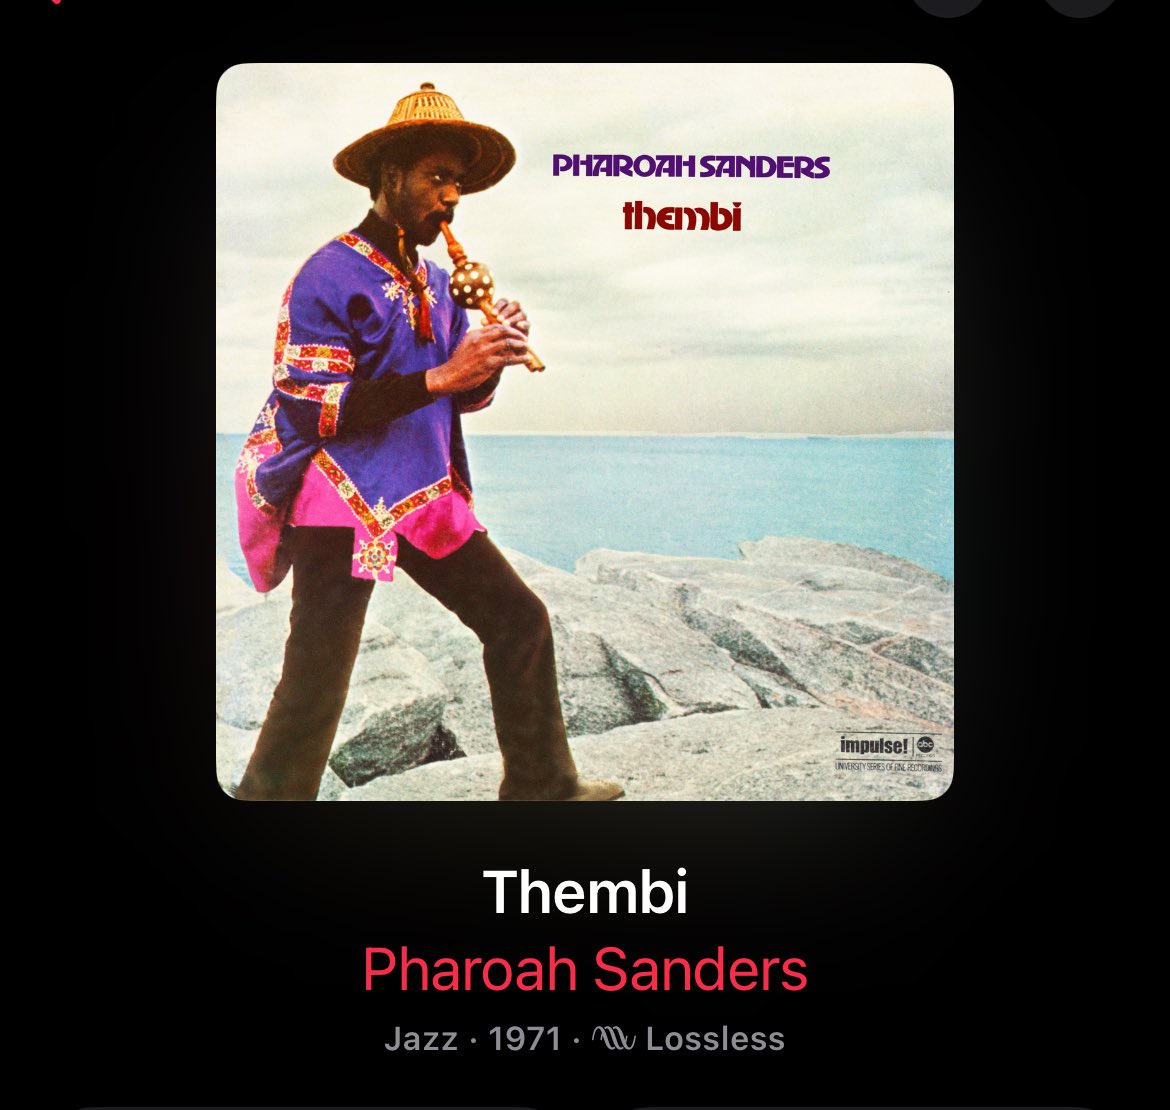 About to get into this #PharoahSanders #Jazz